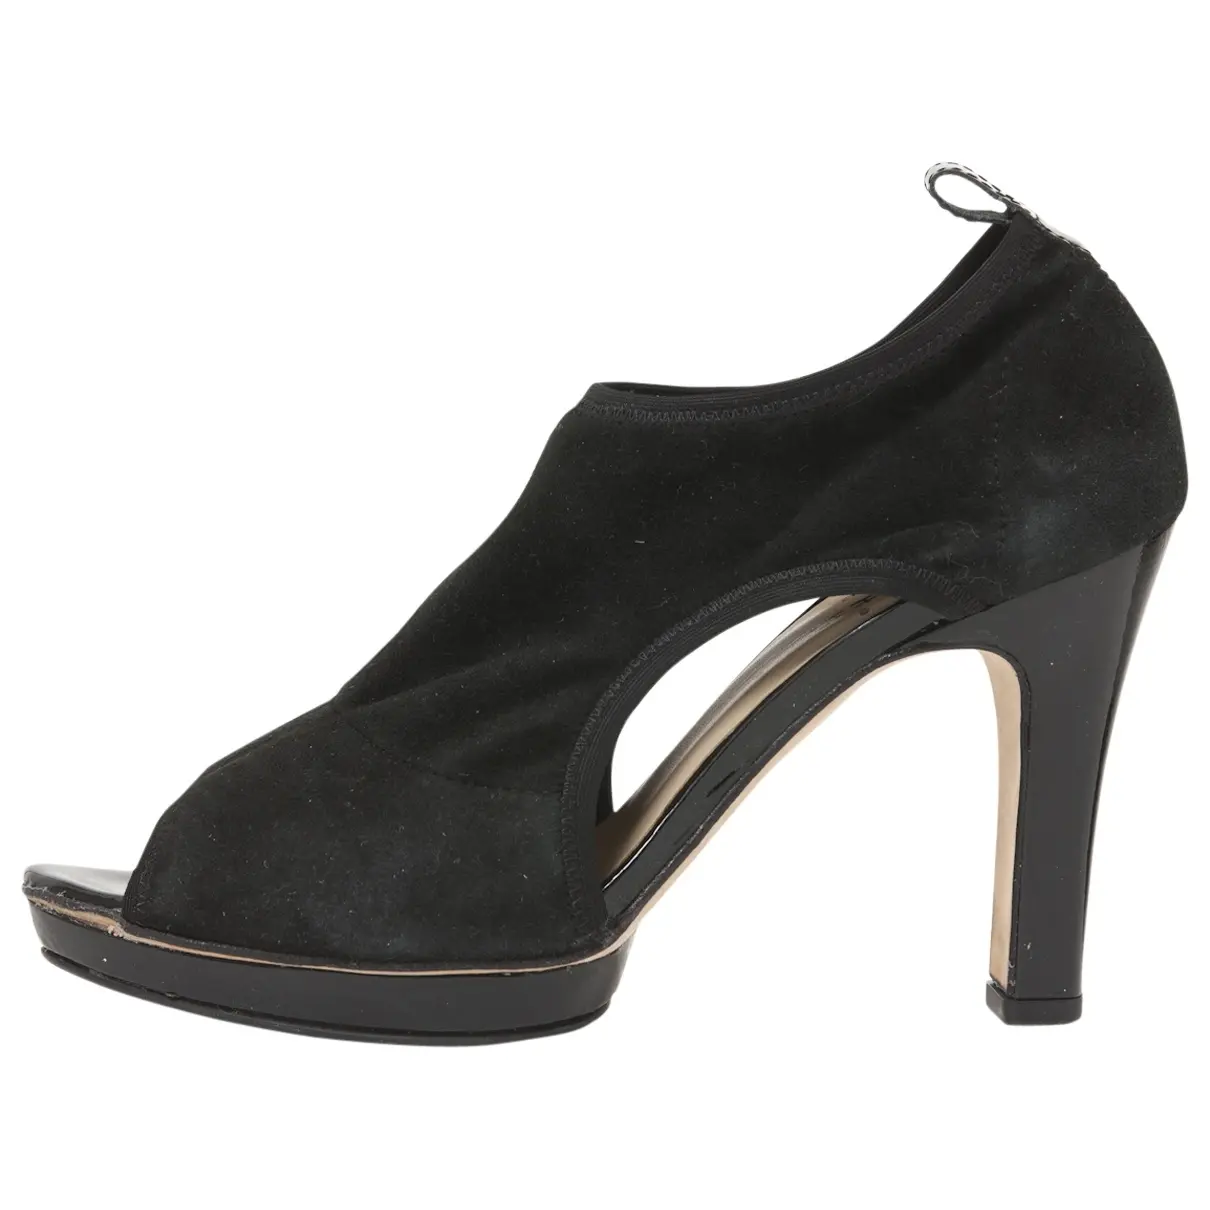 Black Leather Heels Repetto